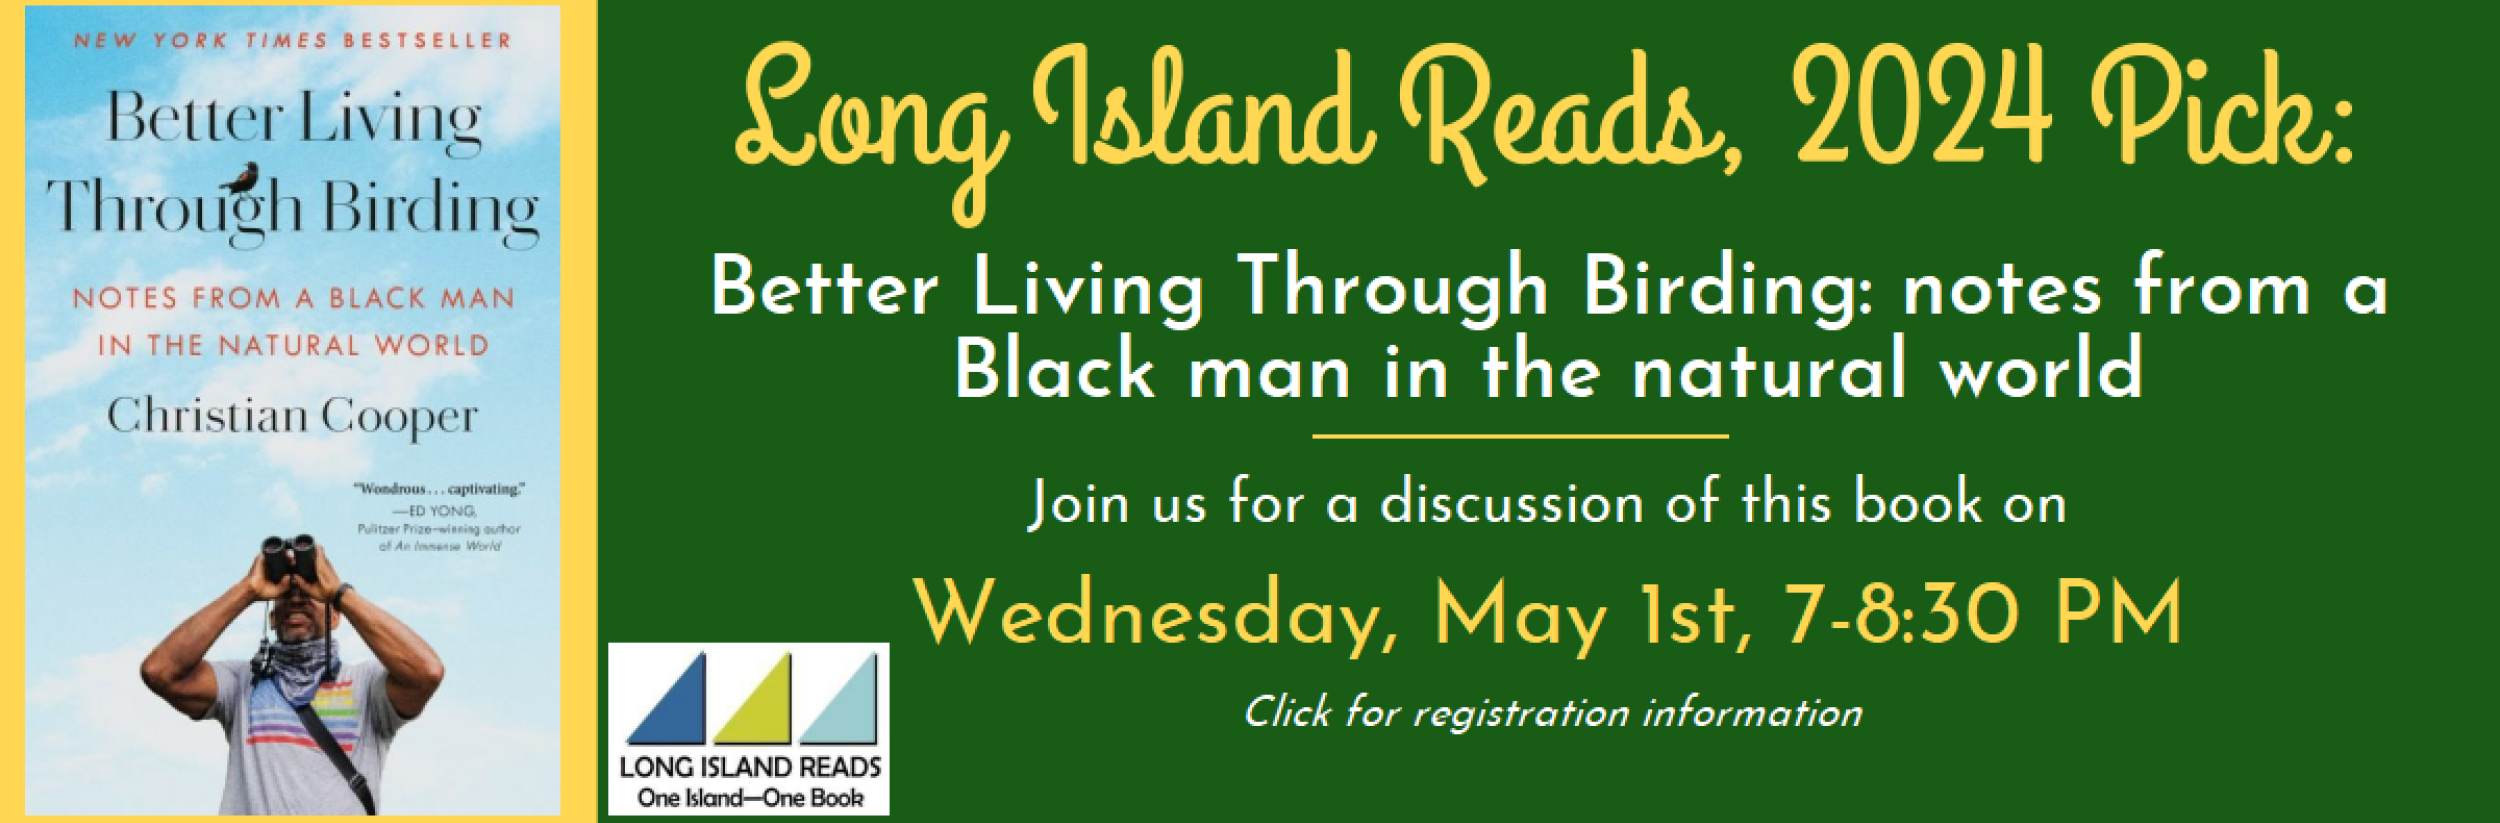 Image for "Long Island Reads, 2024 Pick"